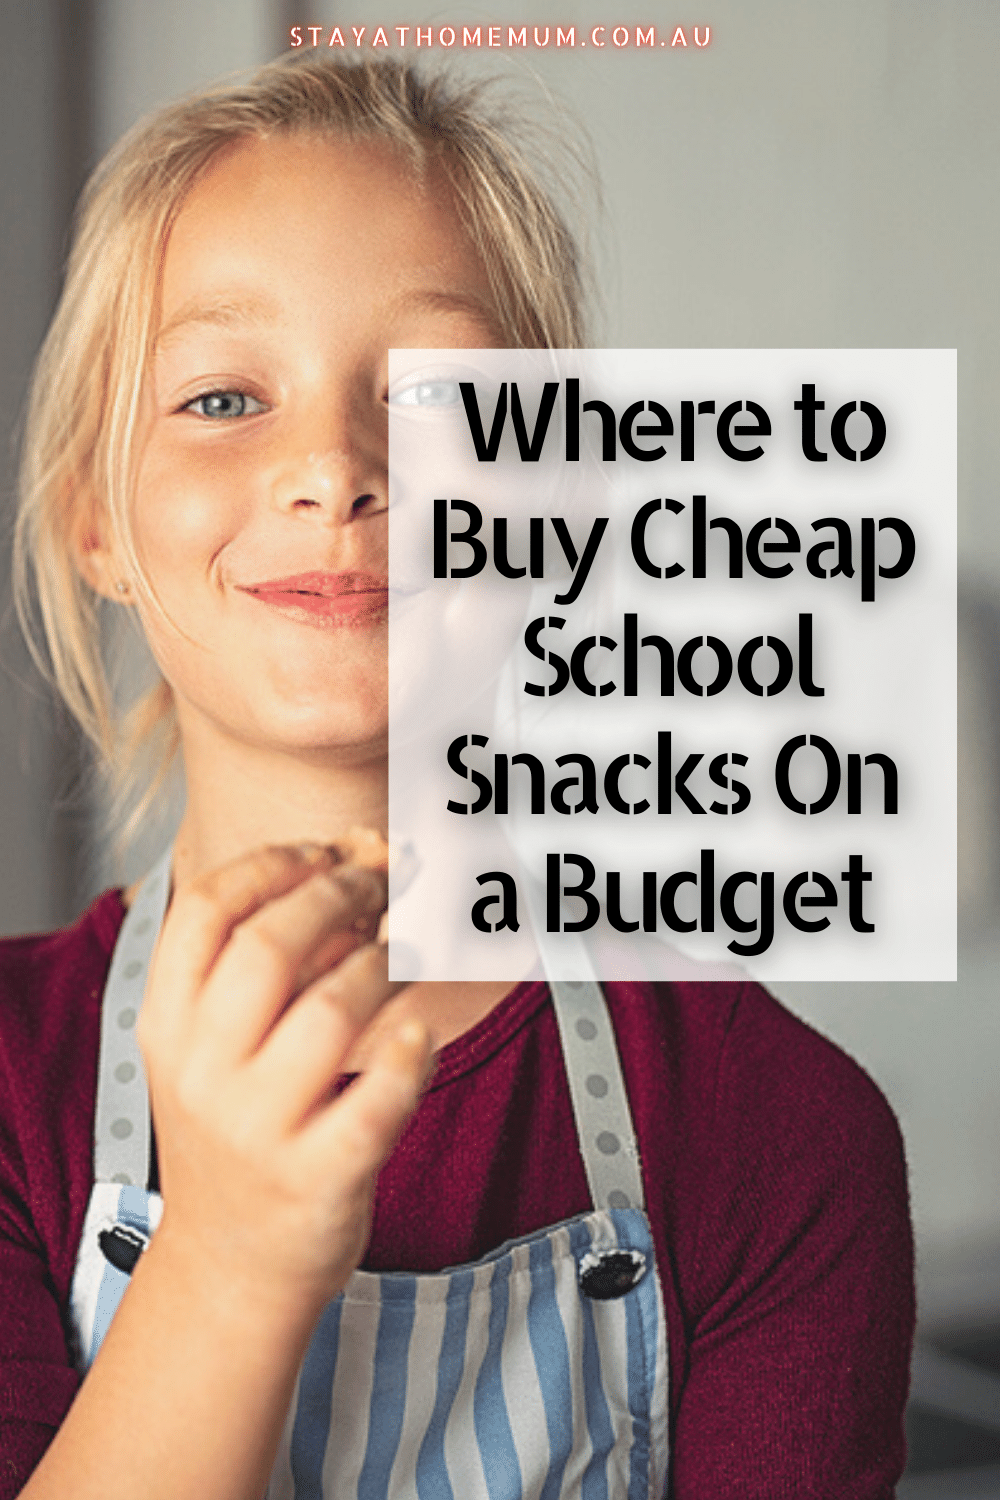 Where to Buy Cheap School Snacks On a Budget | Stay At Home Mum